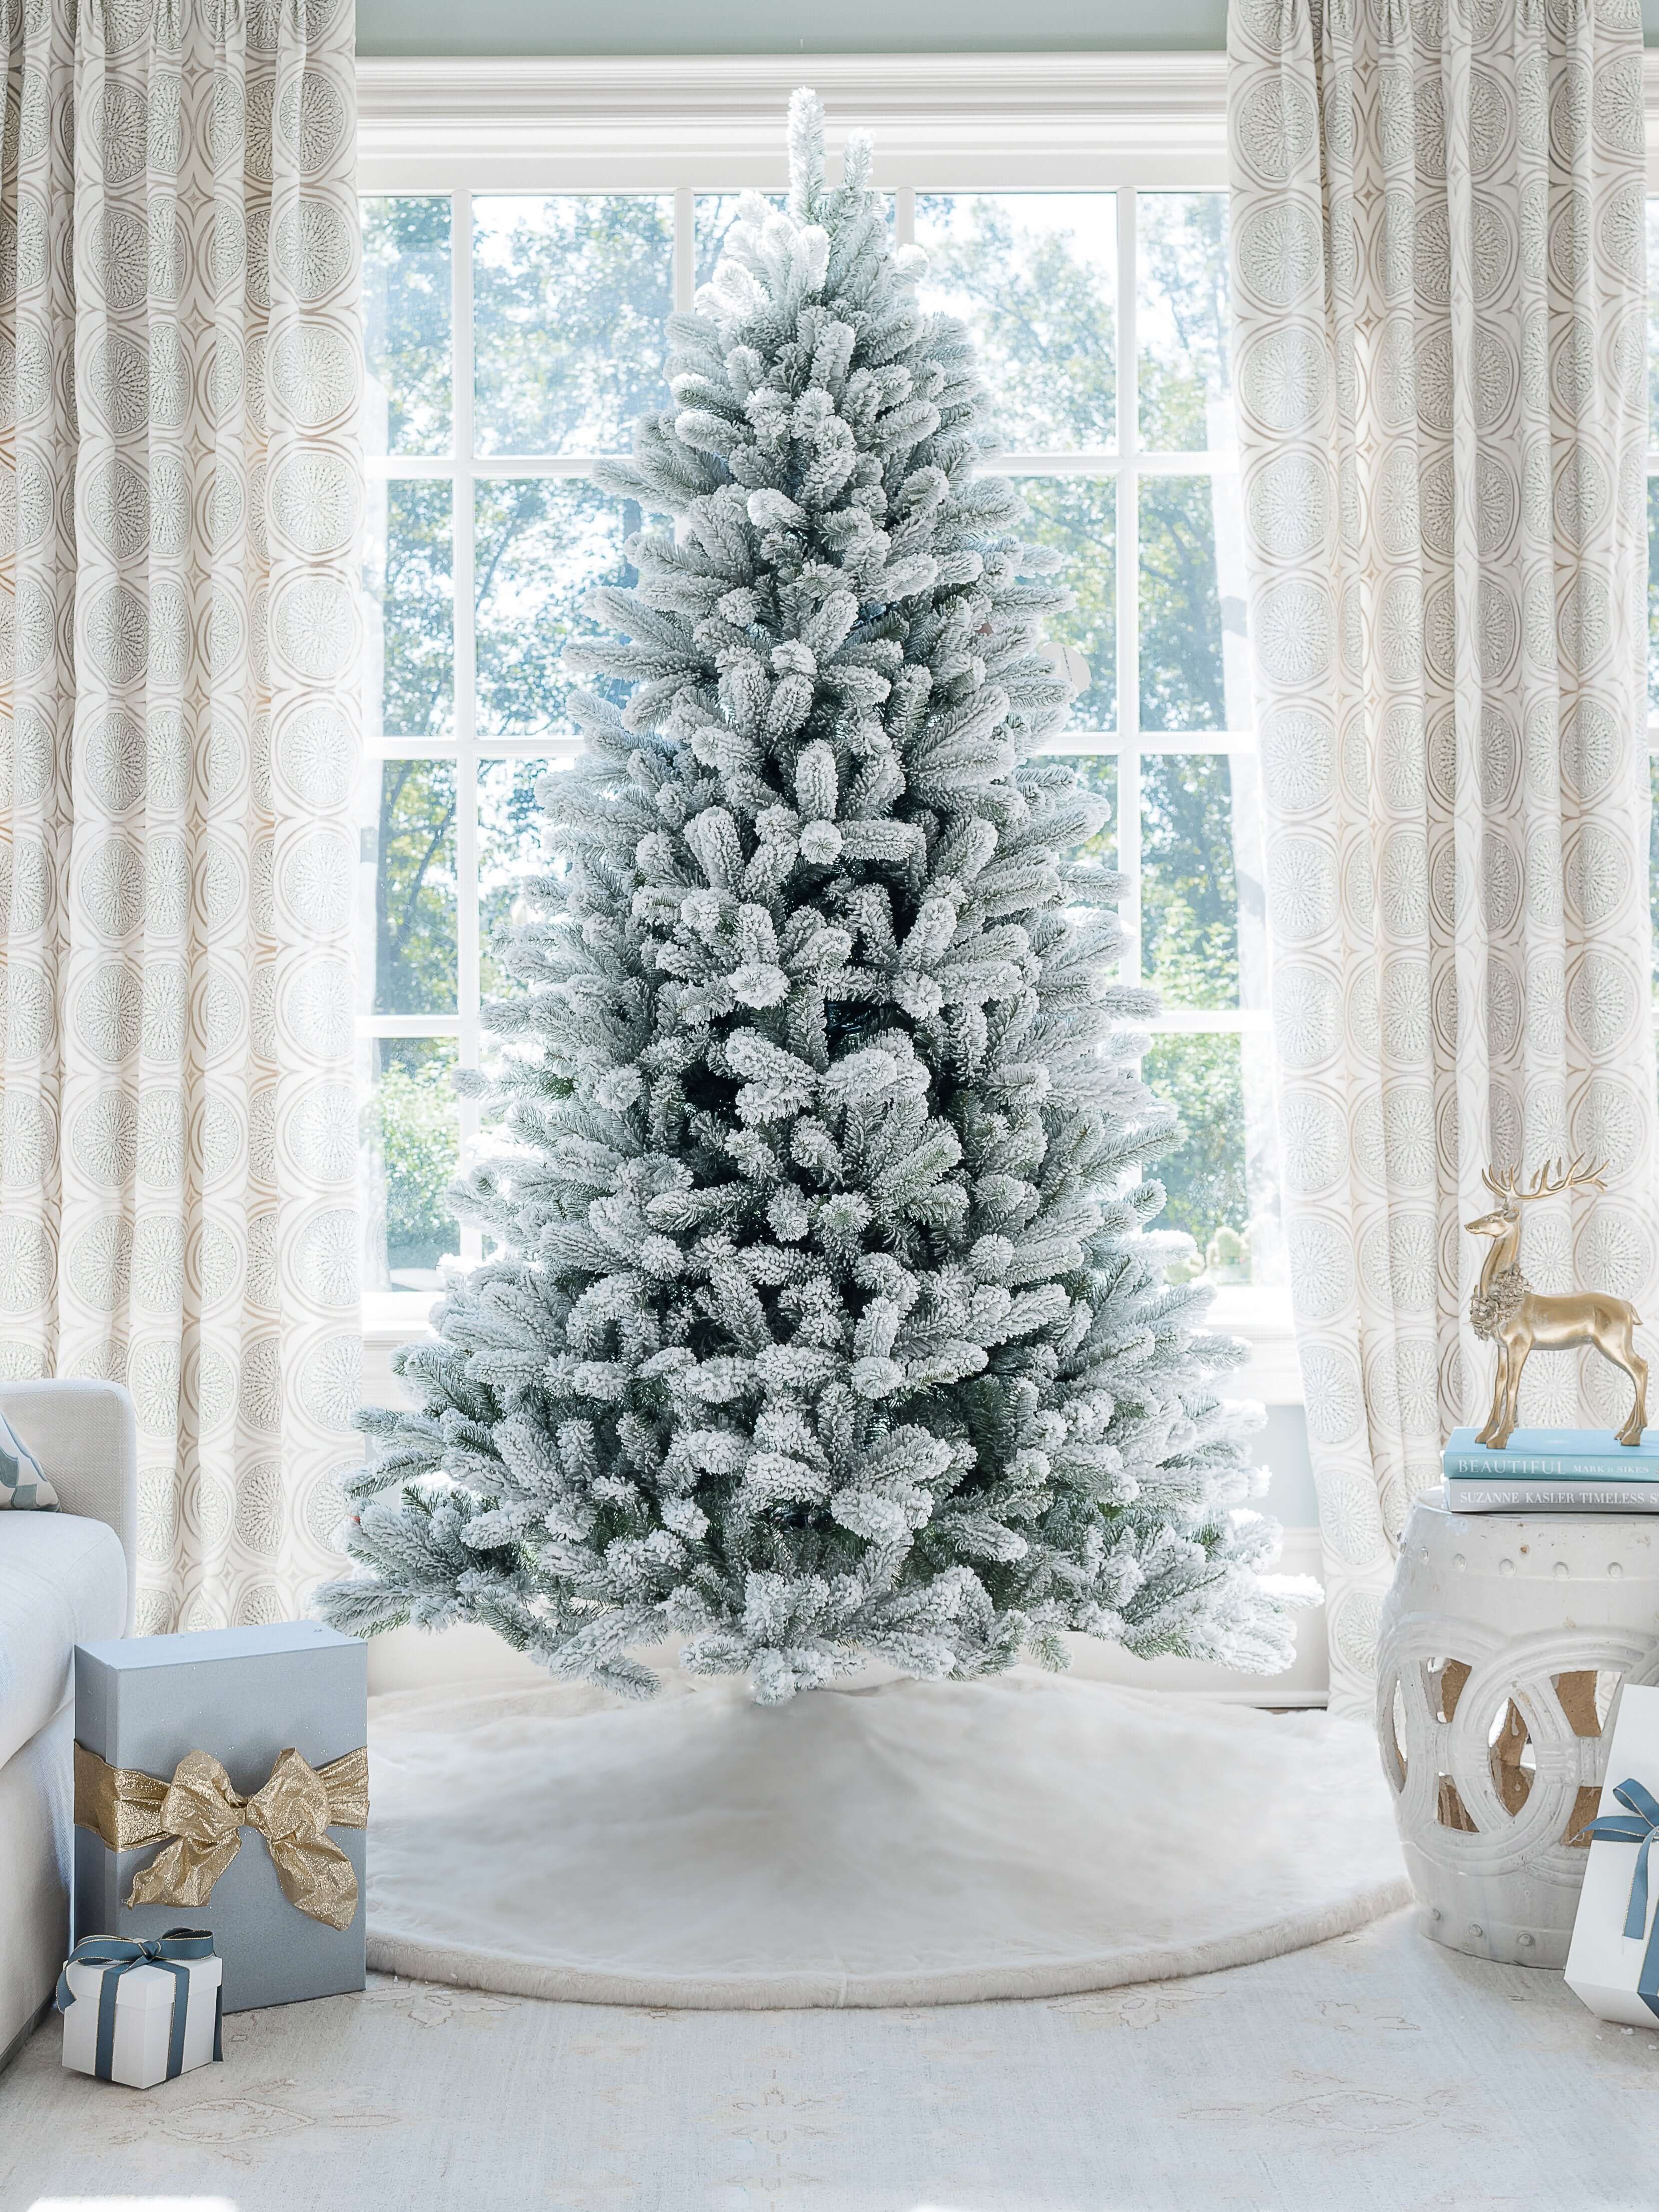 King of Christmas 6.5' King Flock® Artificial Christmas Tree with 600 Warm White LED Lights